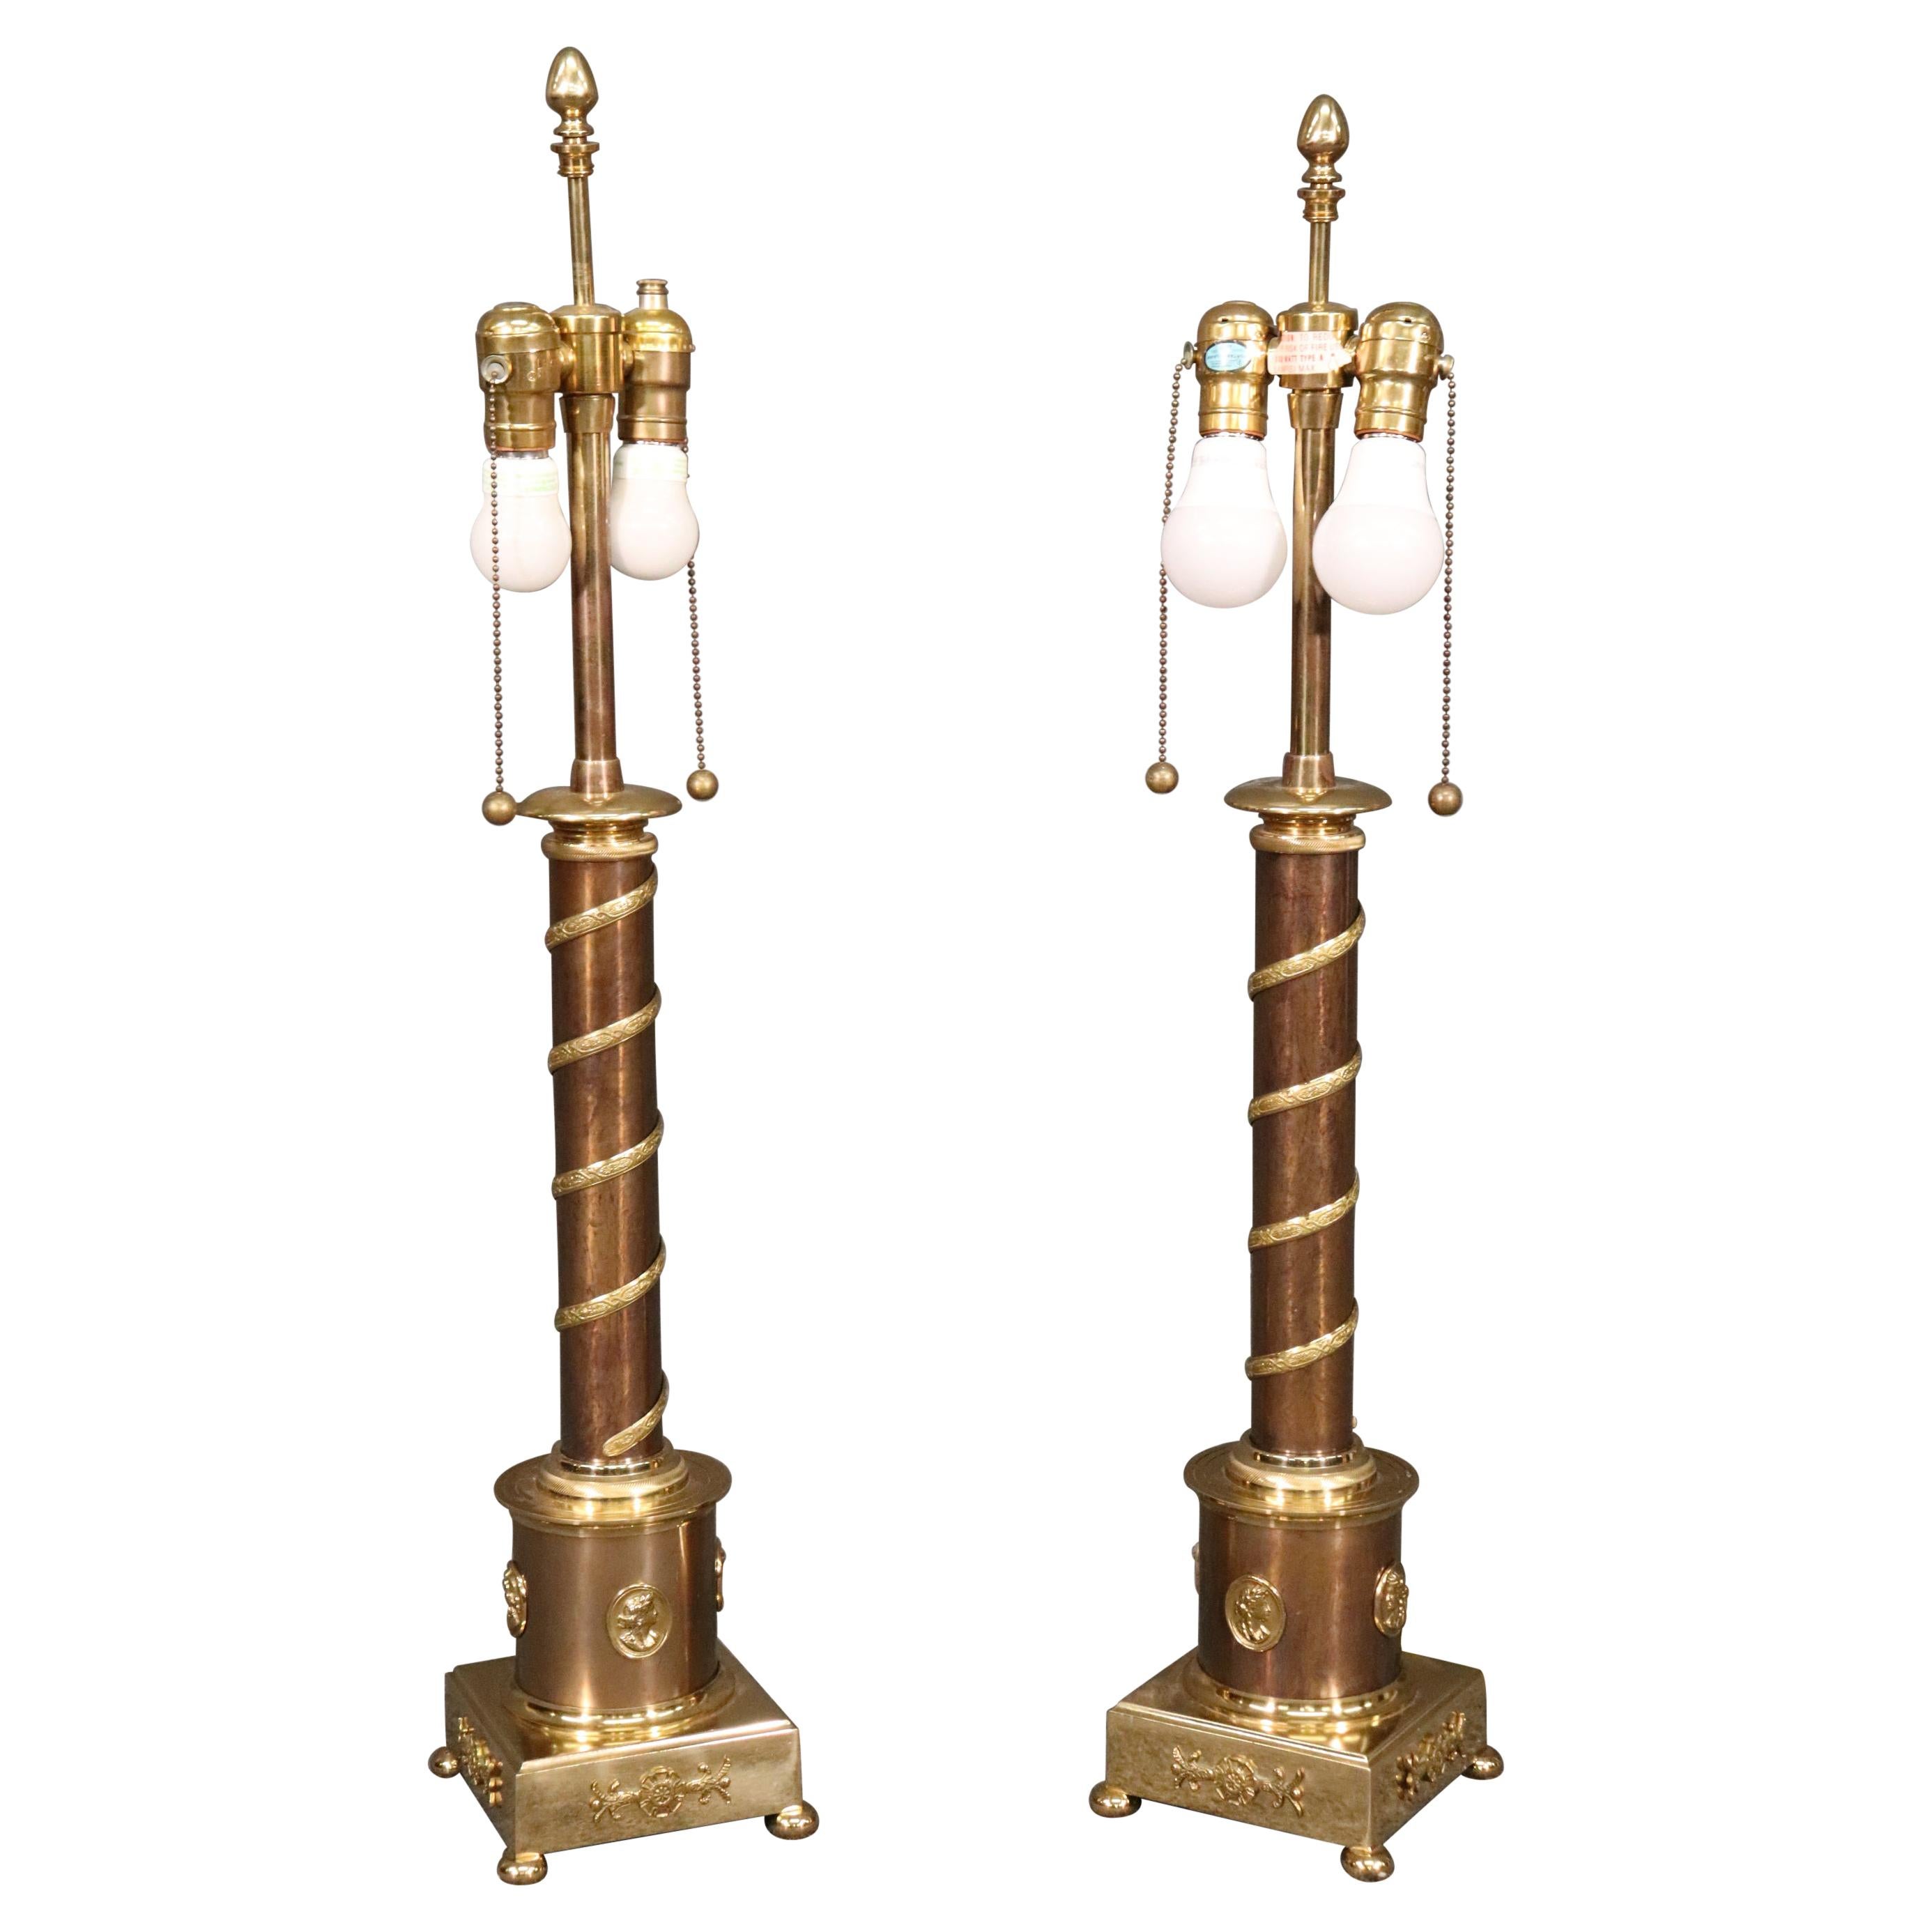 Superb Pair of French Solid Bronze and Brass French Empire Table Lamps